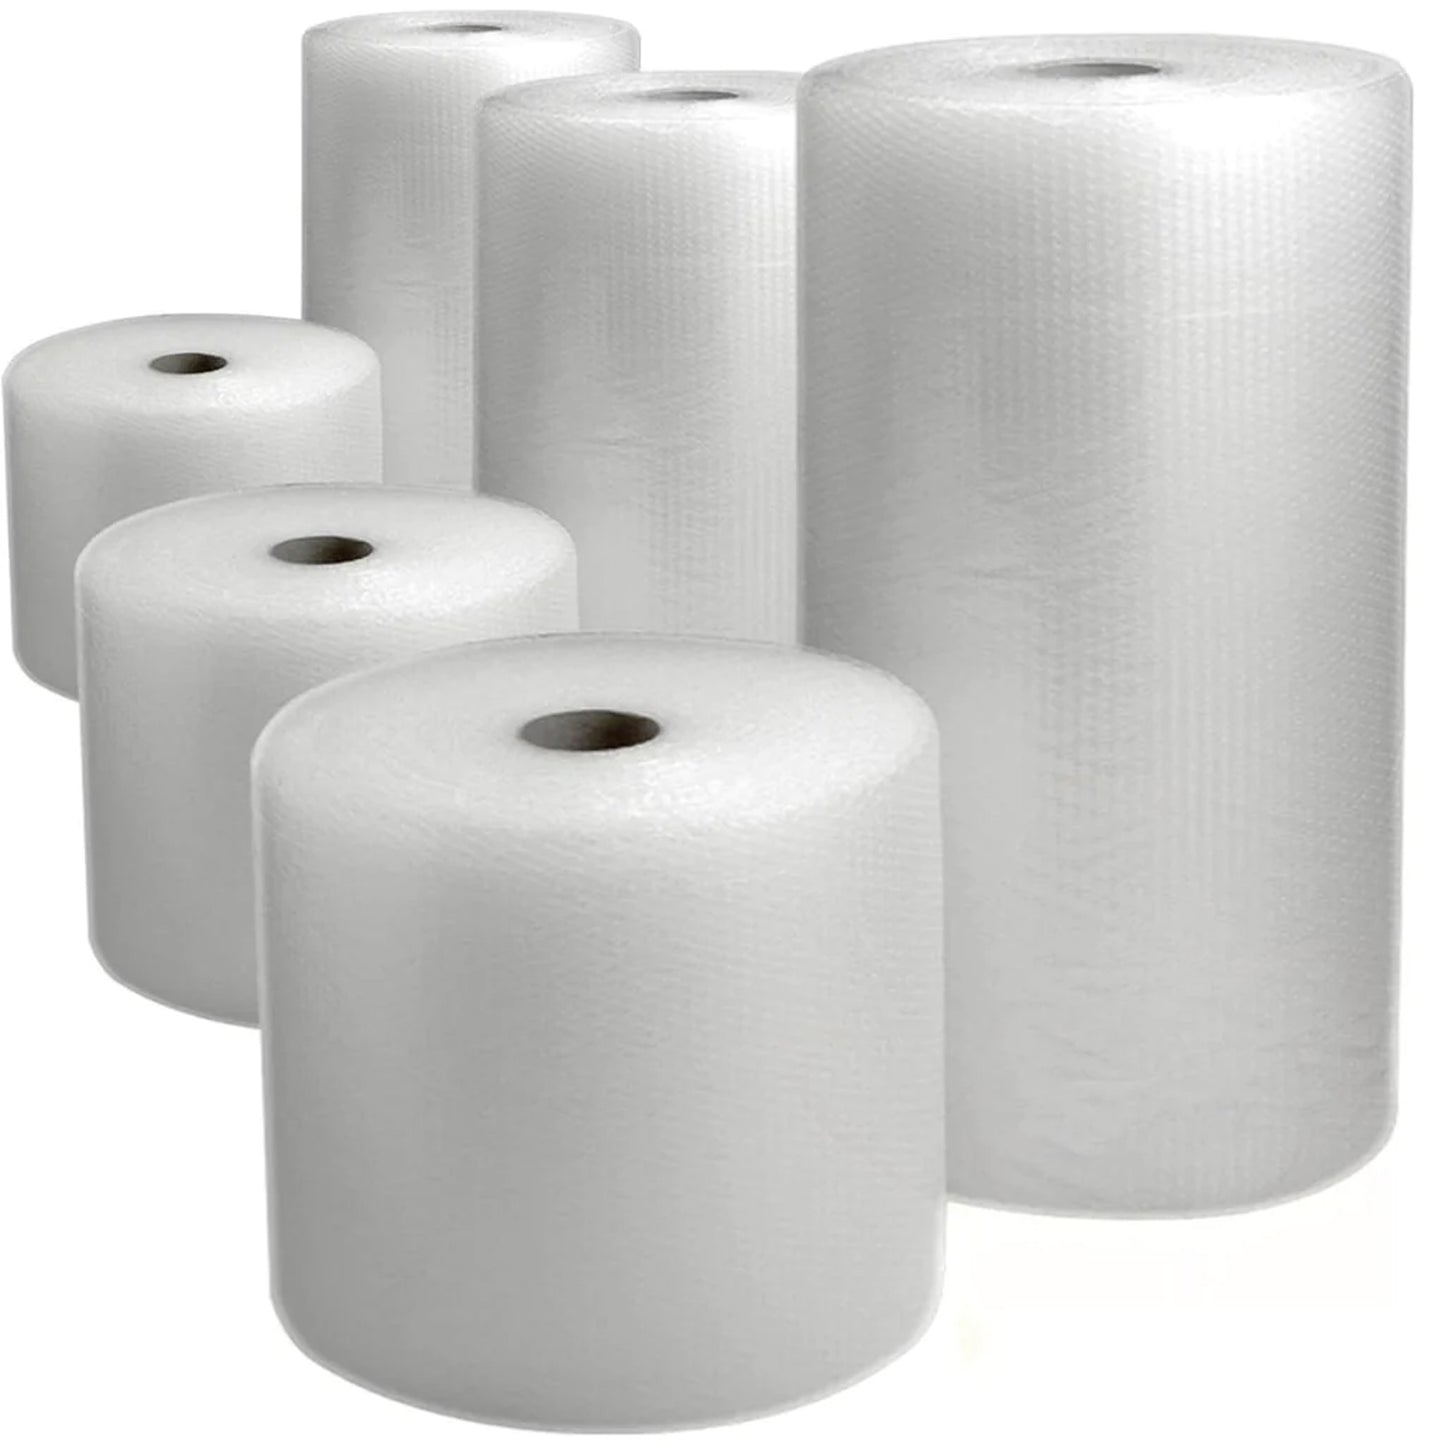 Small & Large Bubble Wrap Rolls 300mm 500mm 750mm 1000mm Strong Packing Moving Wrapping Rolls Protection